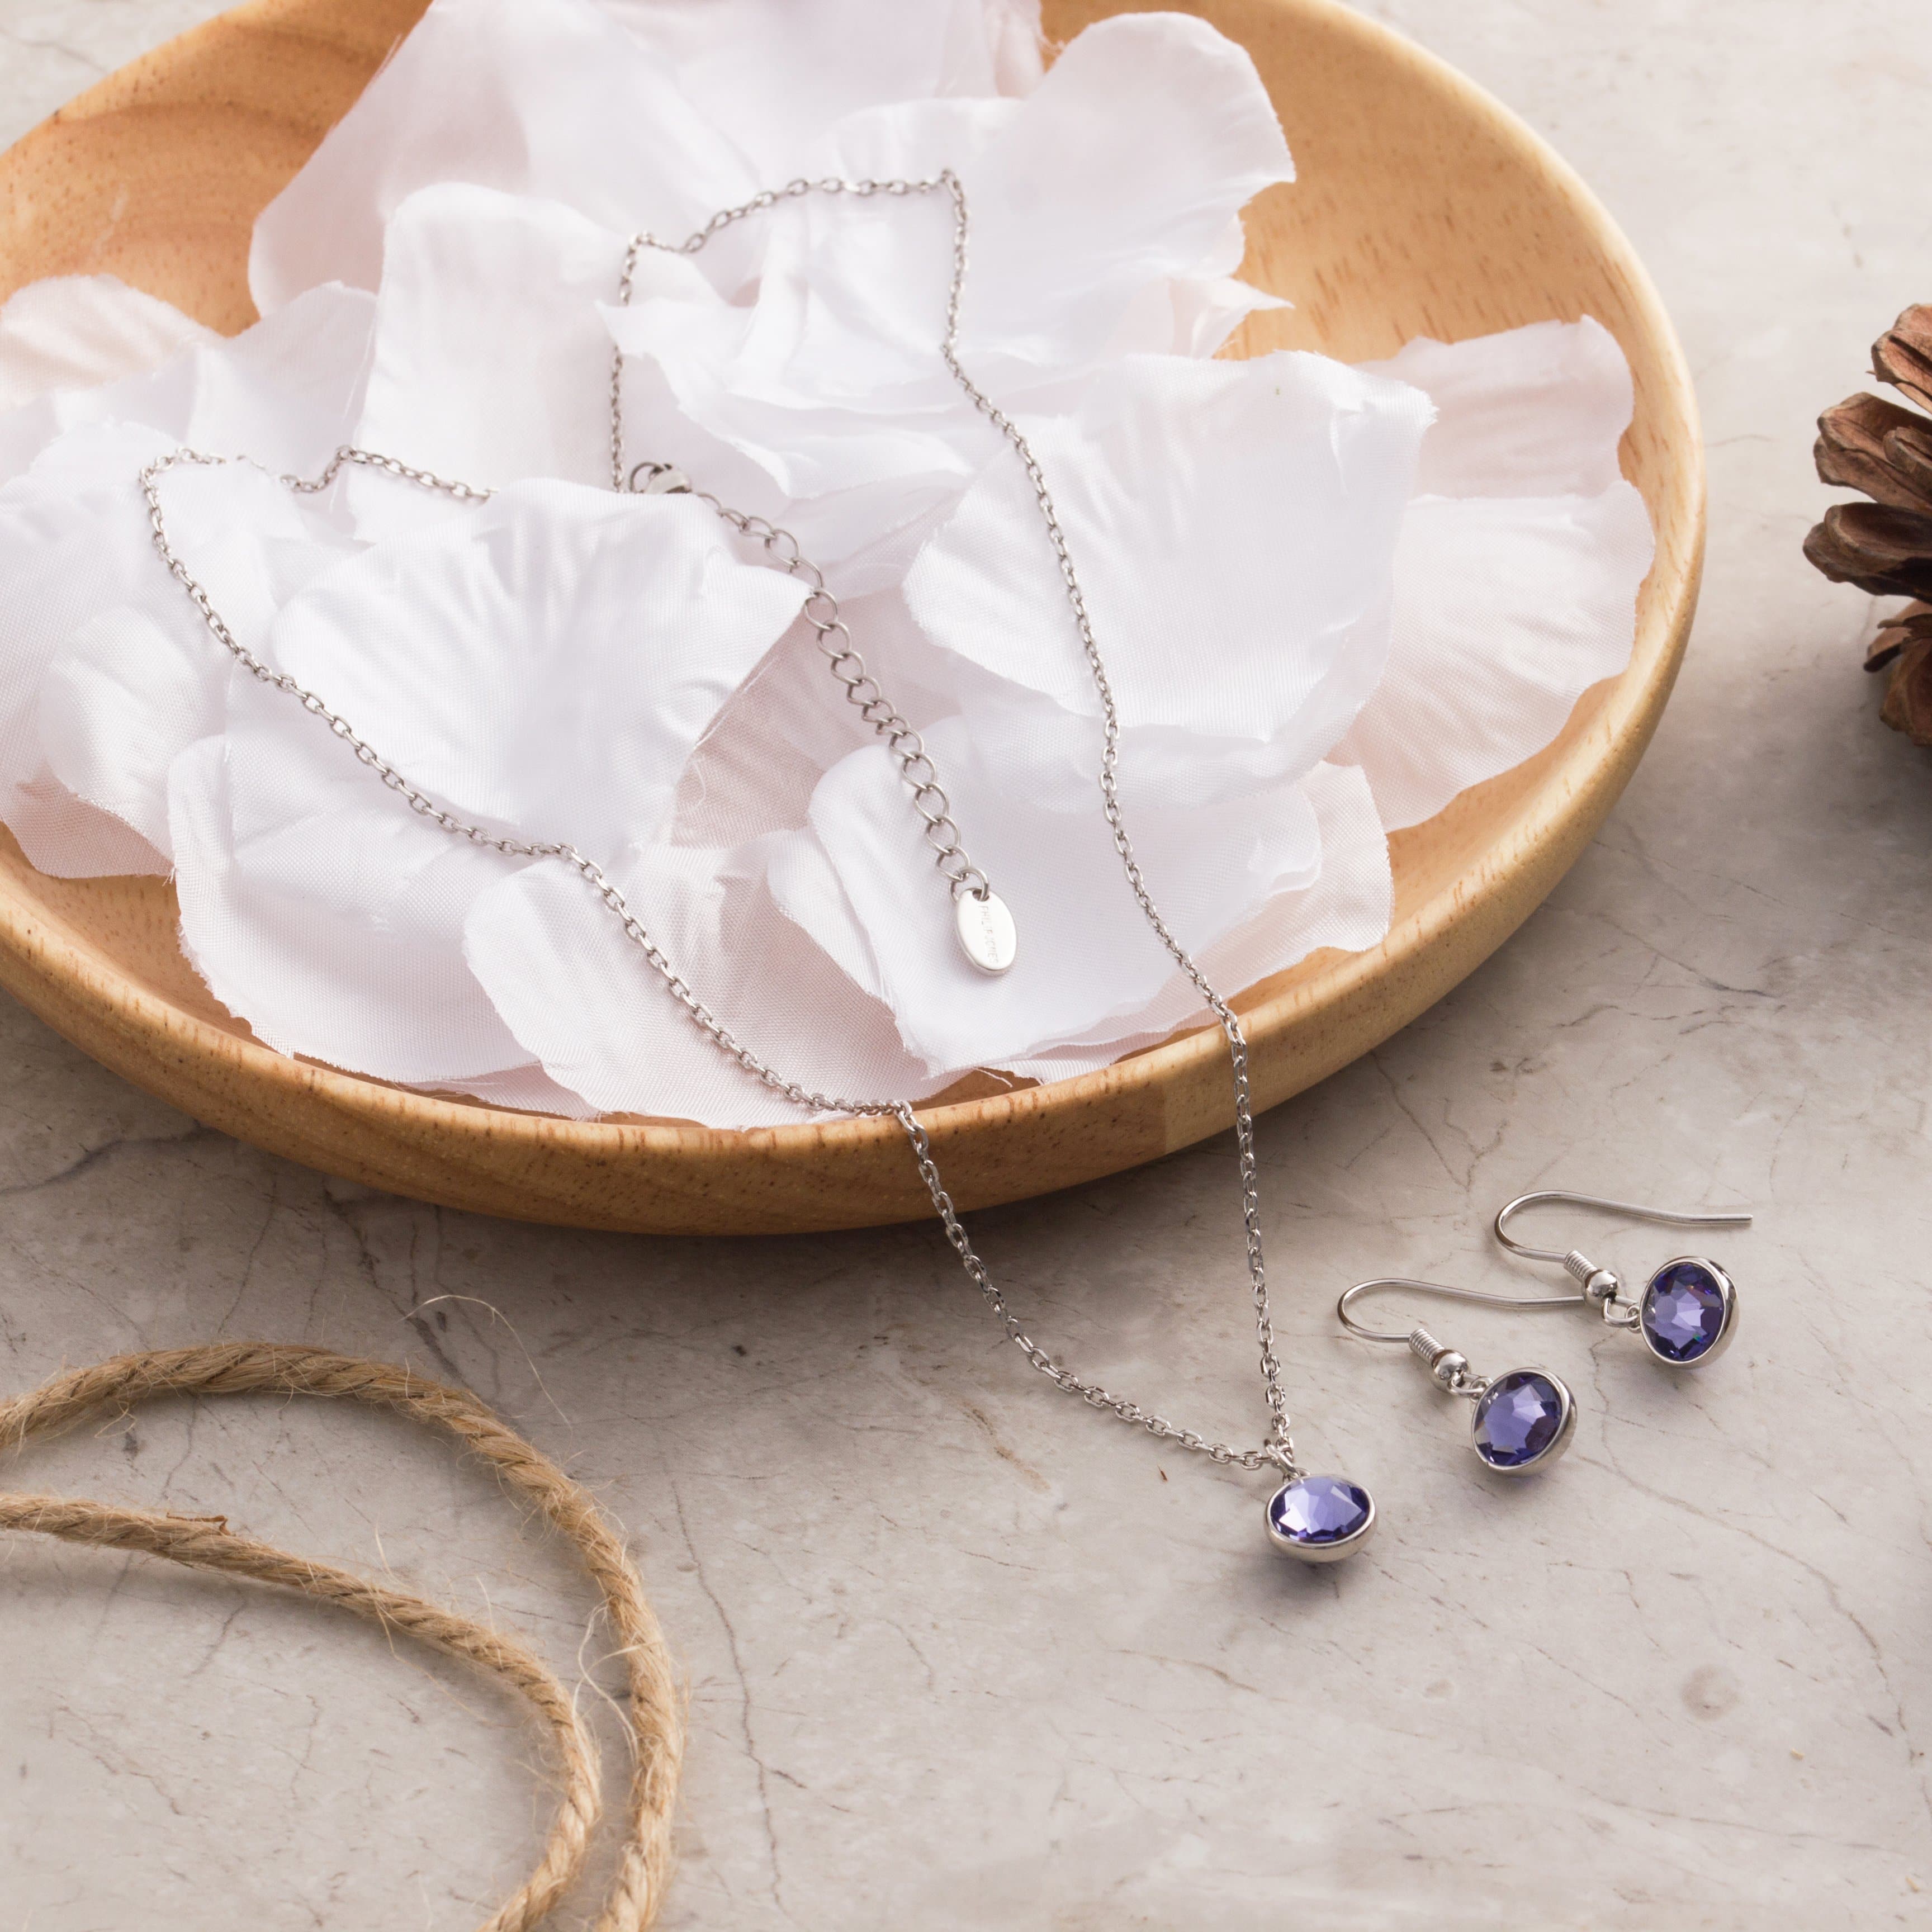 February (Amethyst) Birthstone Necklace & Drop Earrings Set Created with Zircondia® Crystals